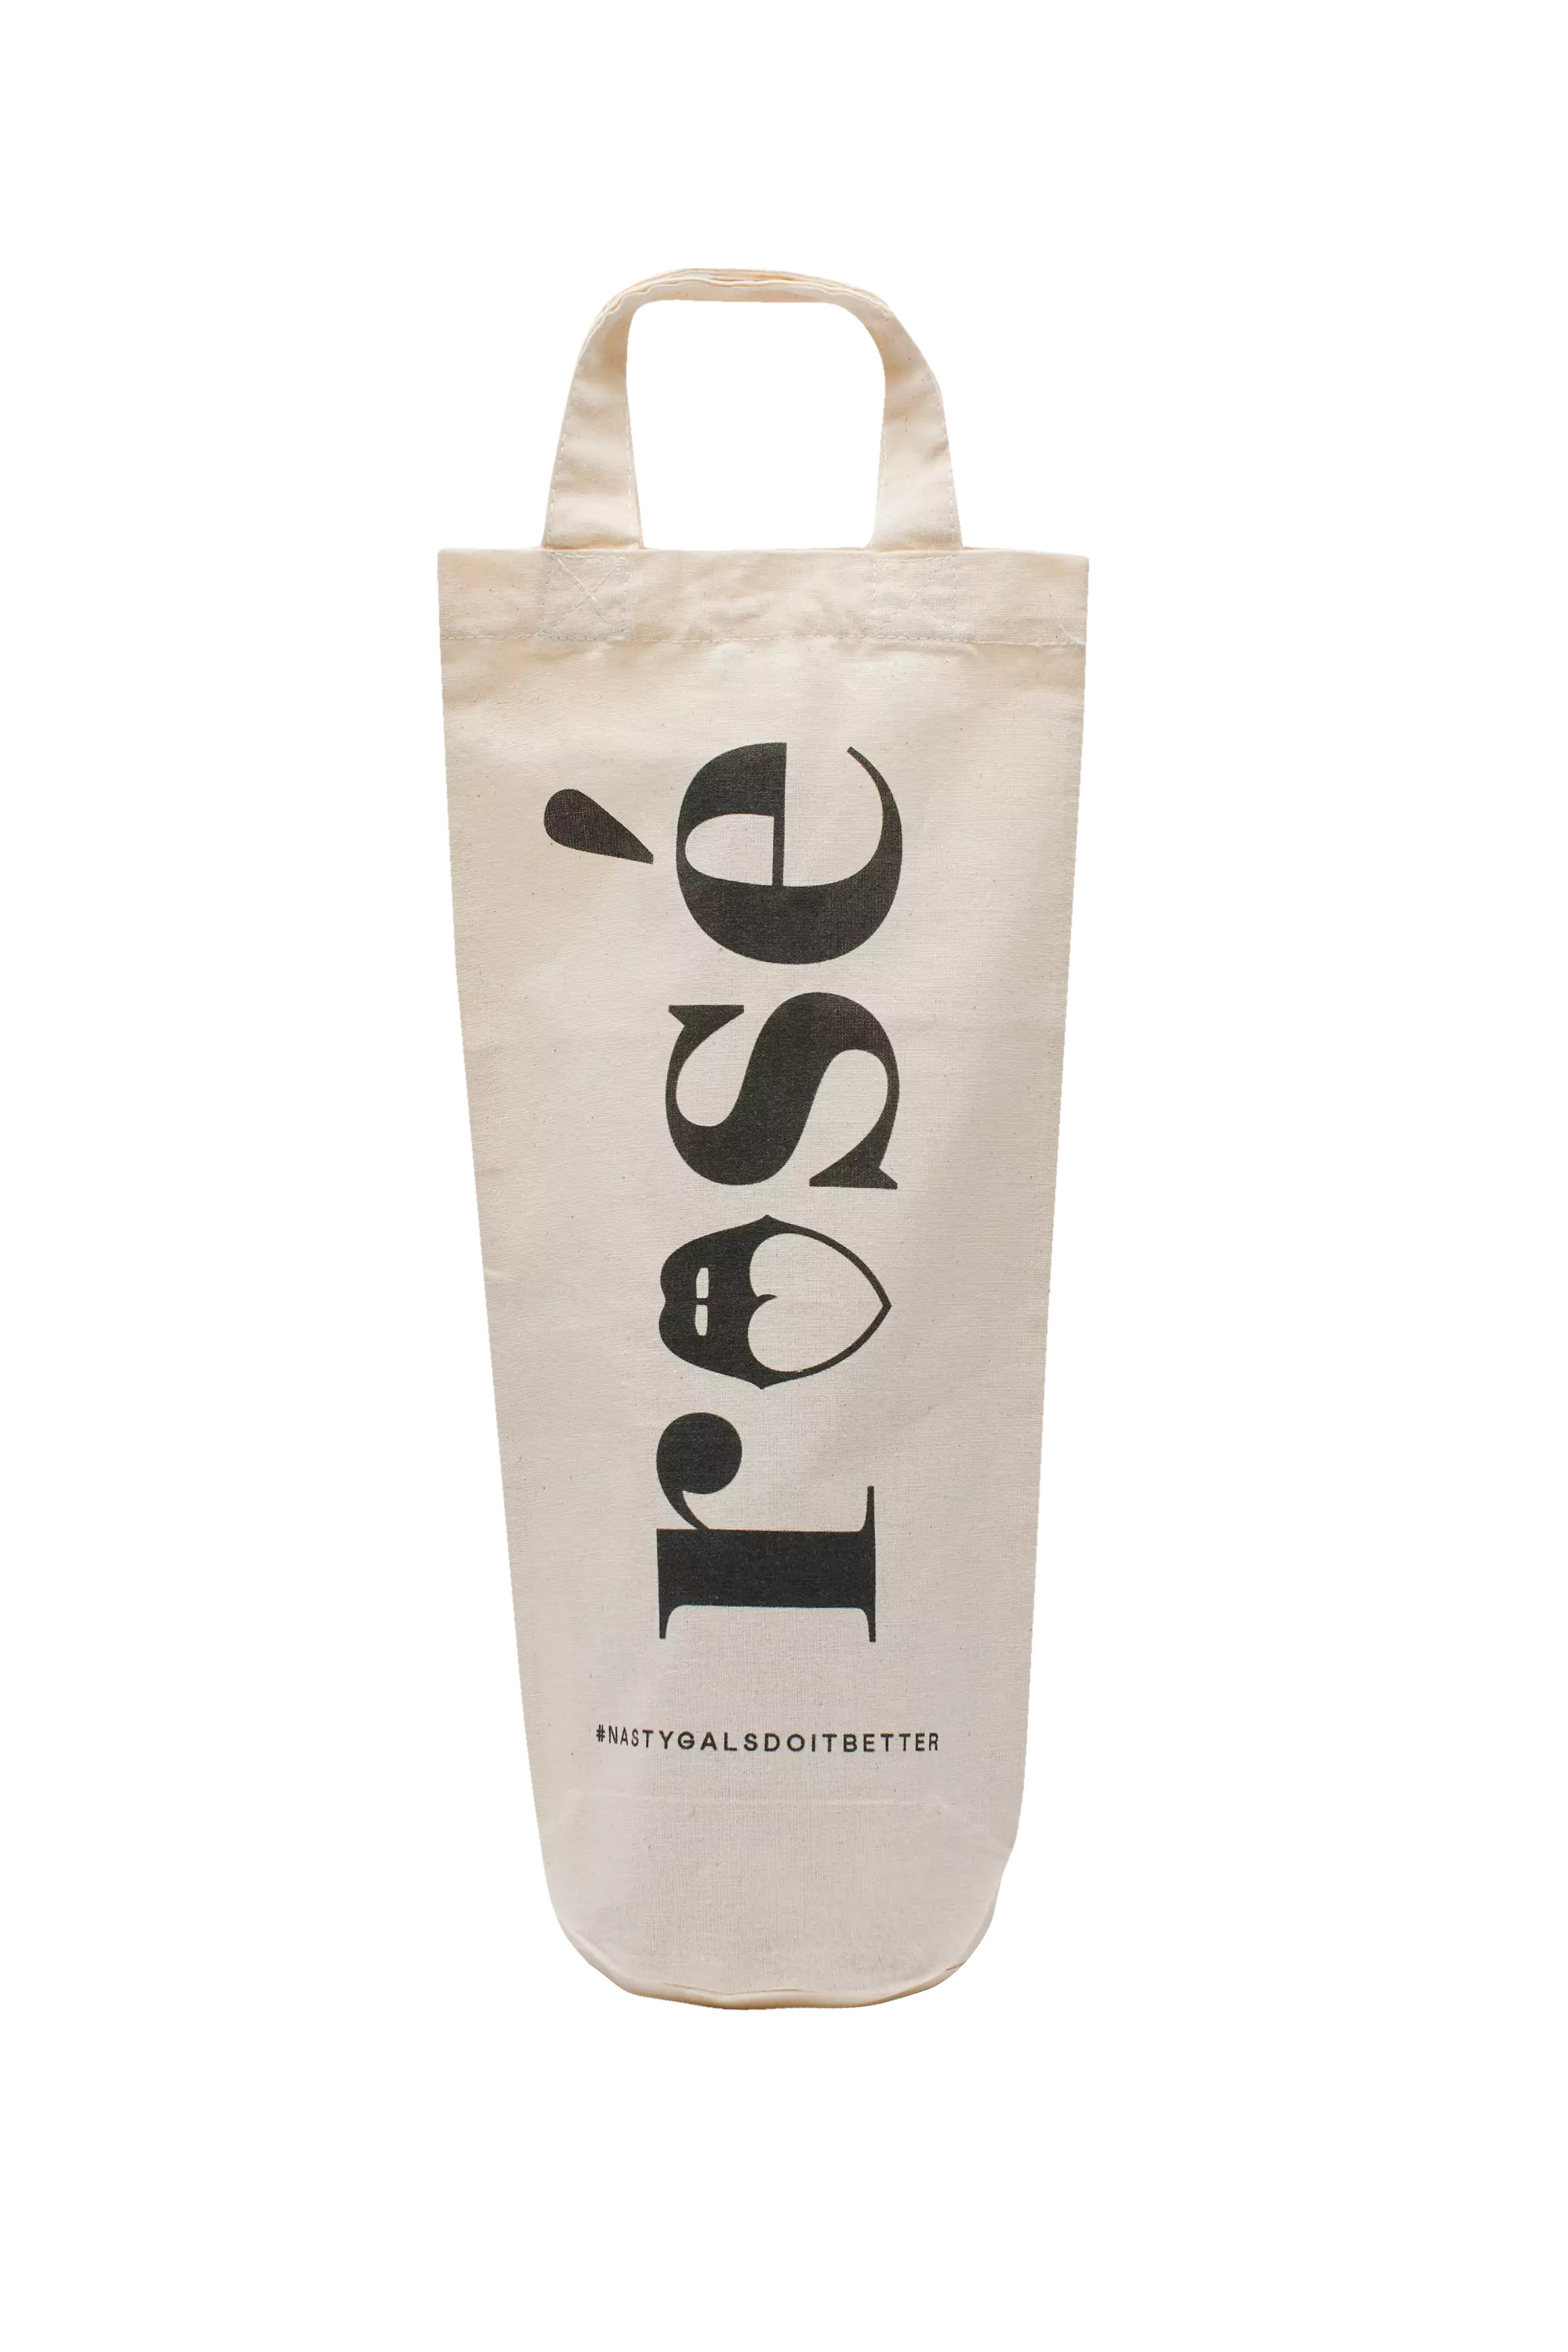 Nasty Gal are now doing tote bags just for your wine (